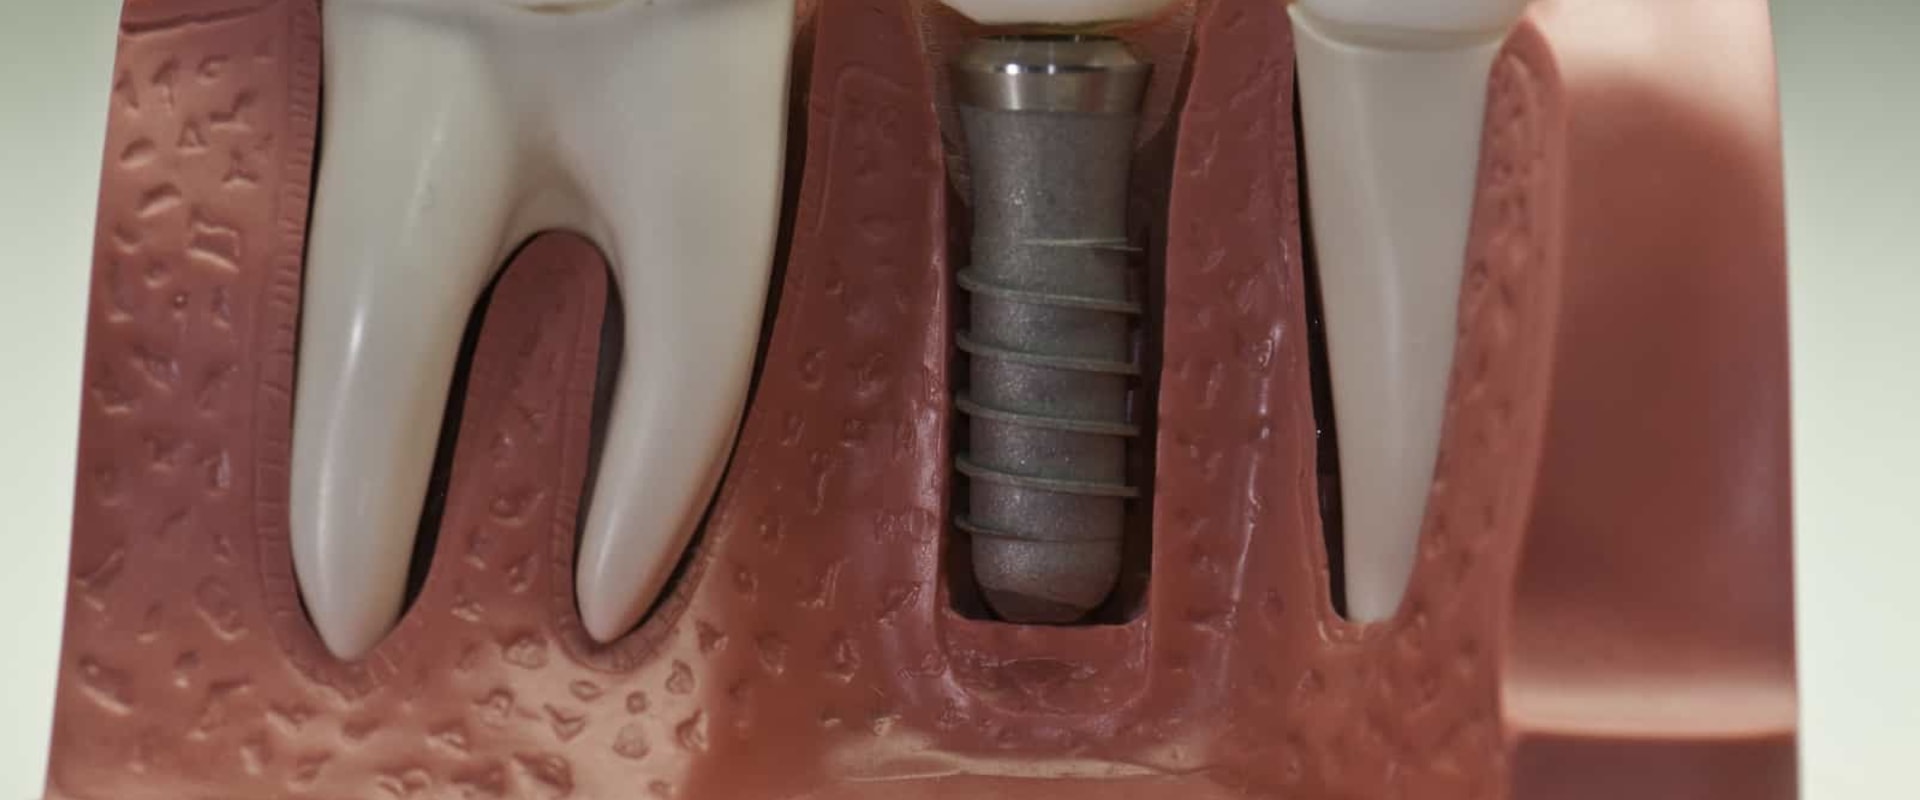 Are dental implants permanent?